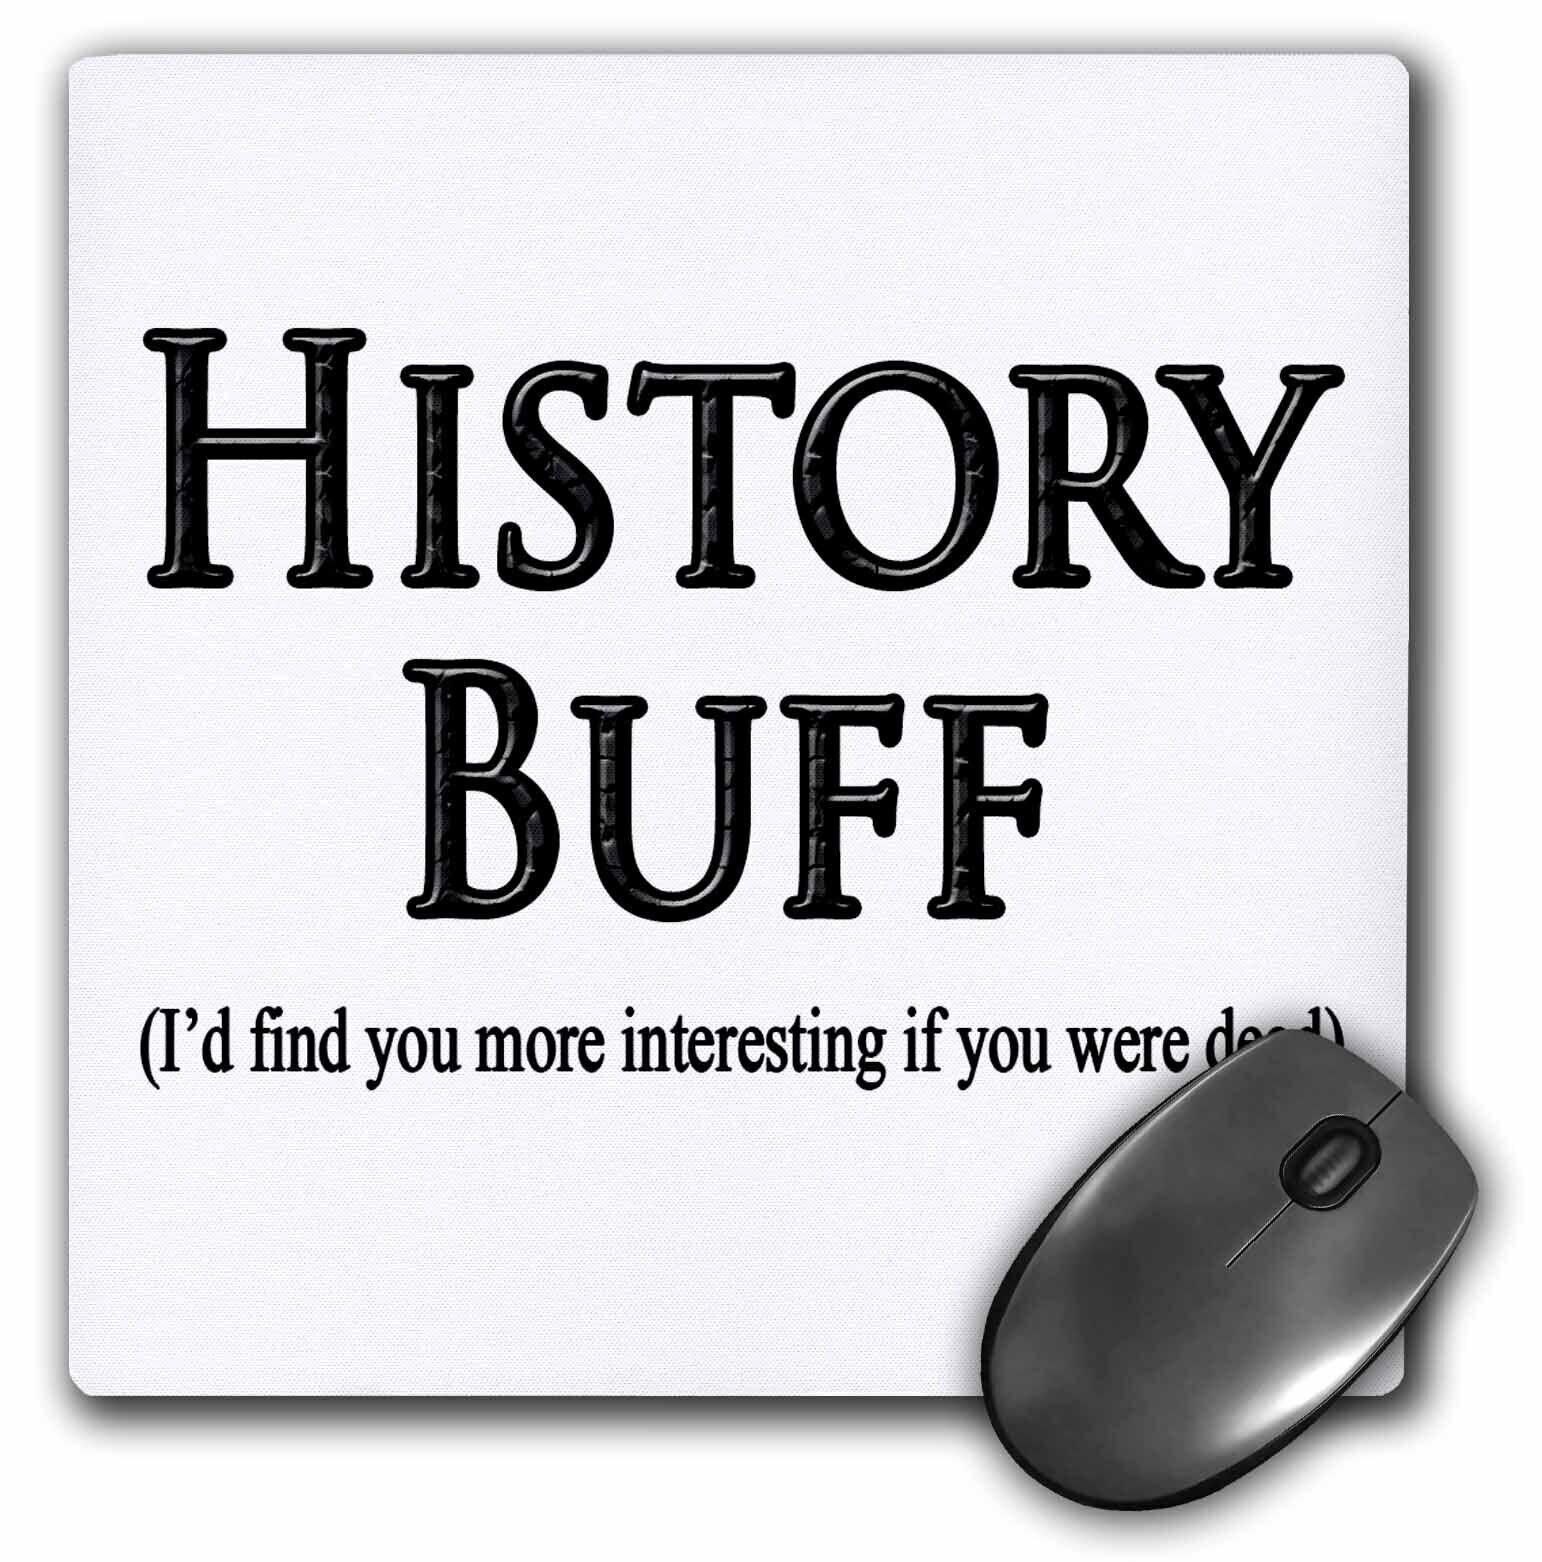 3dRose History Buff Id find you more interesting if you were dead. MousePad